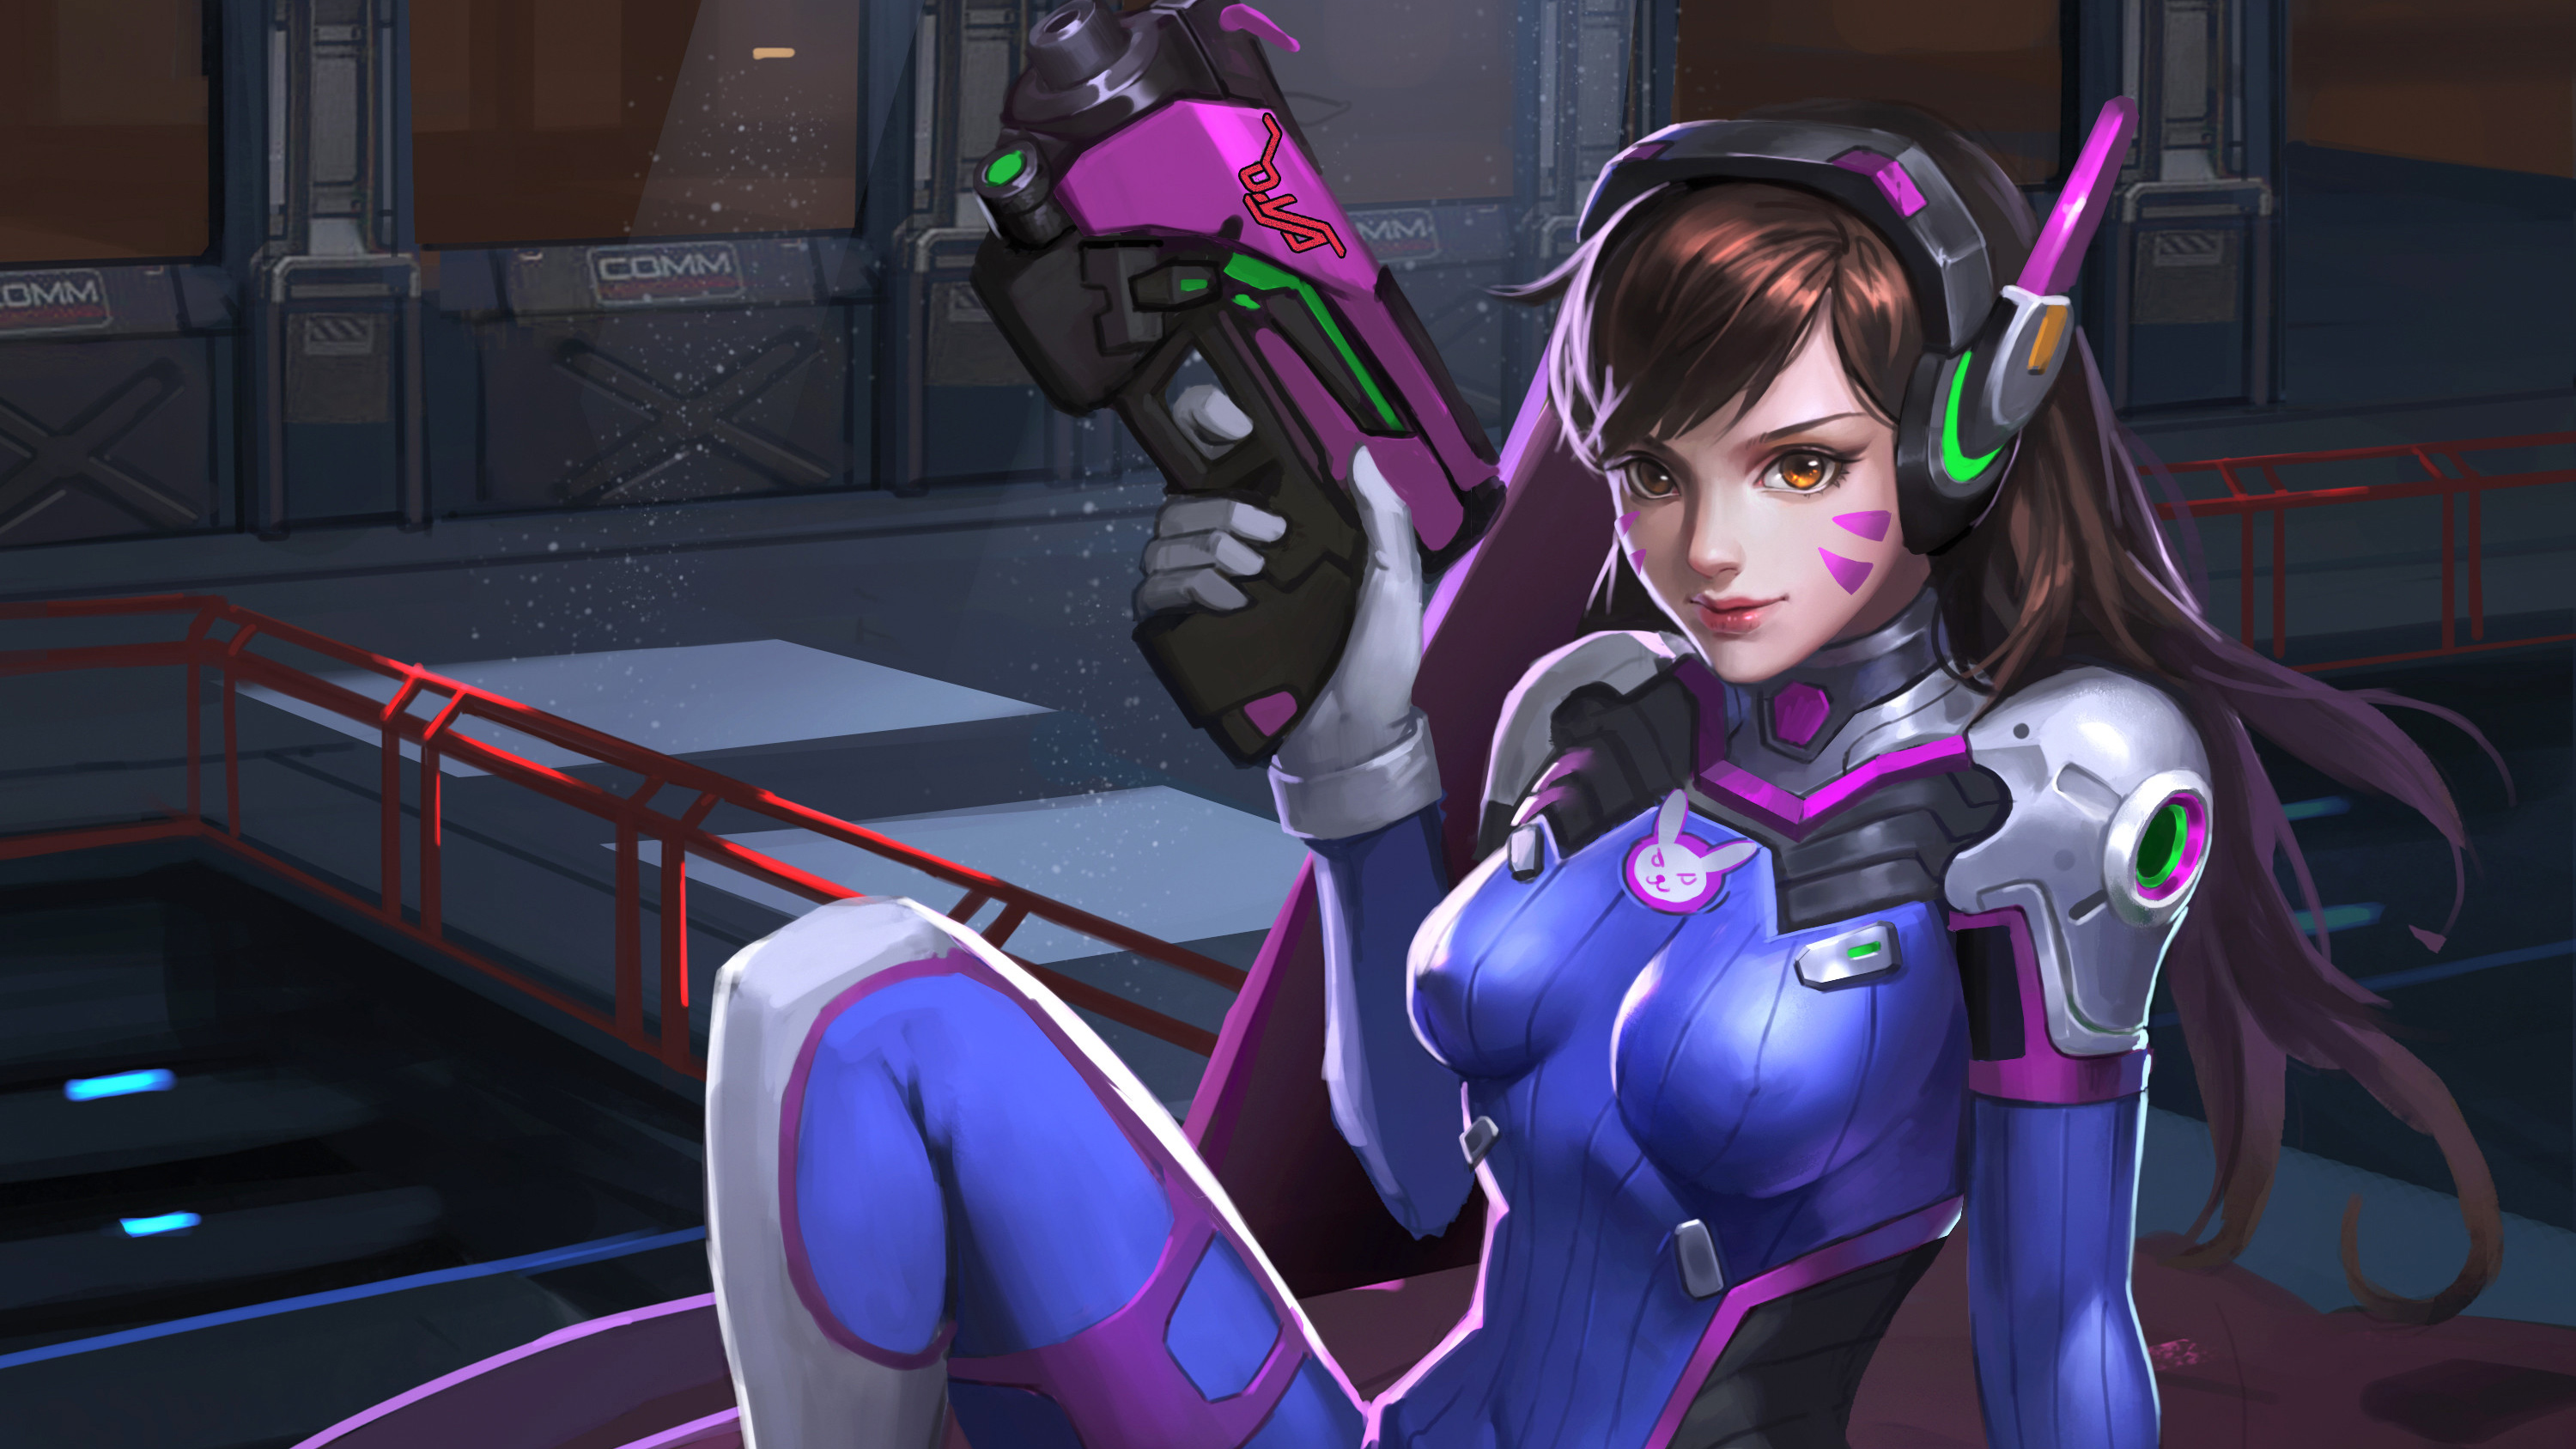 Dva Overwatch Art 2020 Wallpaper,HD Games Wallpapers,4k Wallpapers,Images,Backgrounds,Photos and